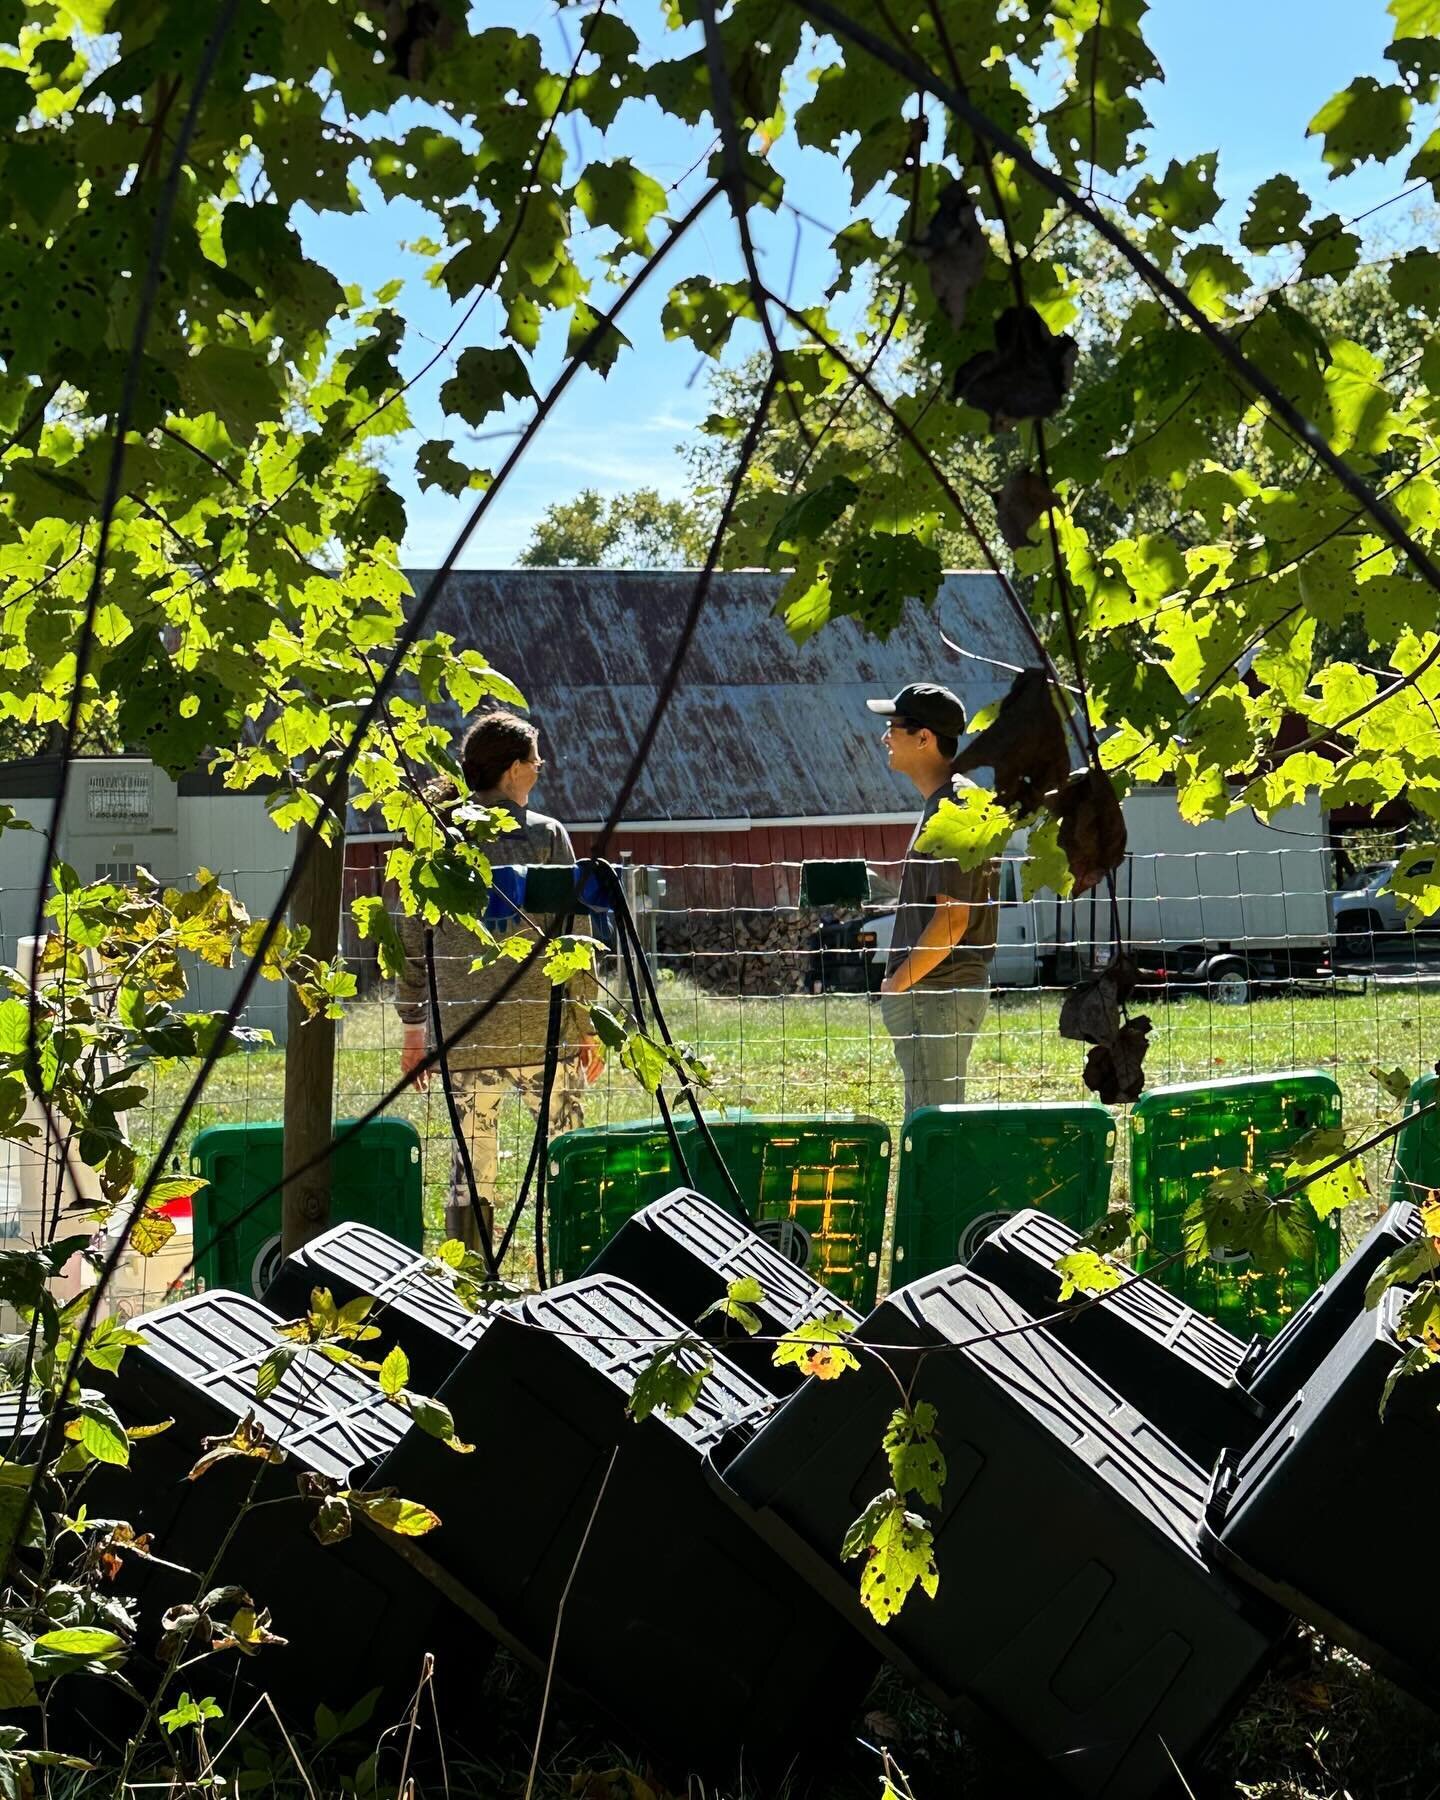 Drop-off tote-d up! Here&rsquo;s just a small look at our regular clean-up on the composting farm. We sure are missing those sunny summer days&hellip; ☀️🌿

Our food waste drop-off bins are available 24/7, so that you can get to composting whenever&m